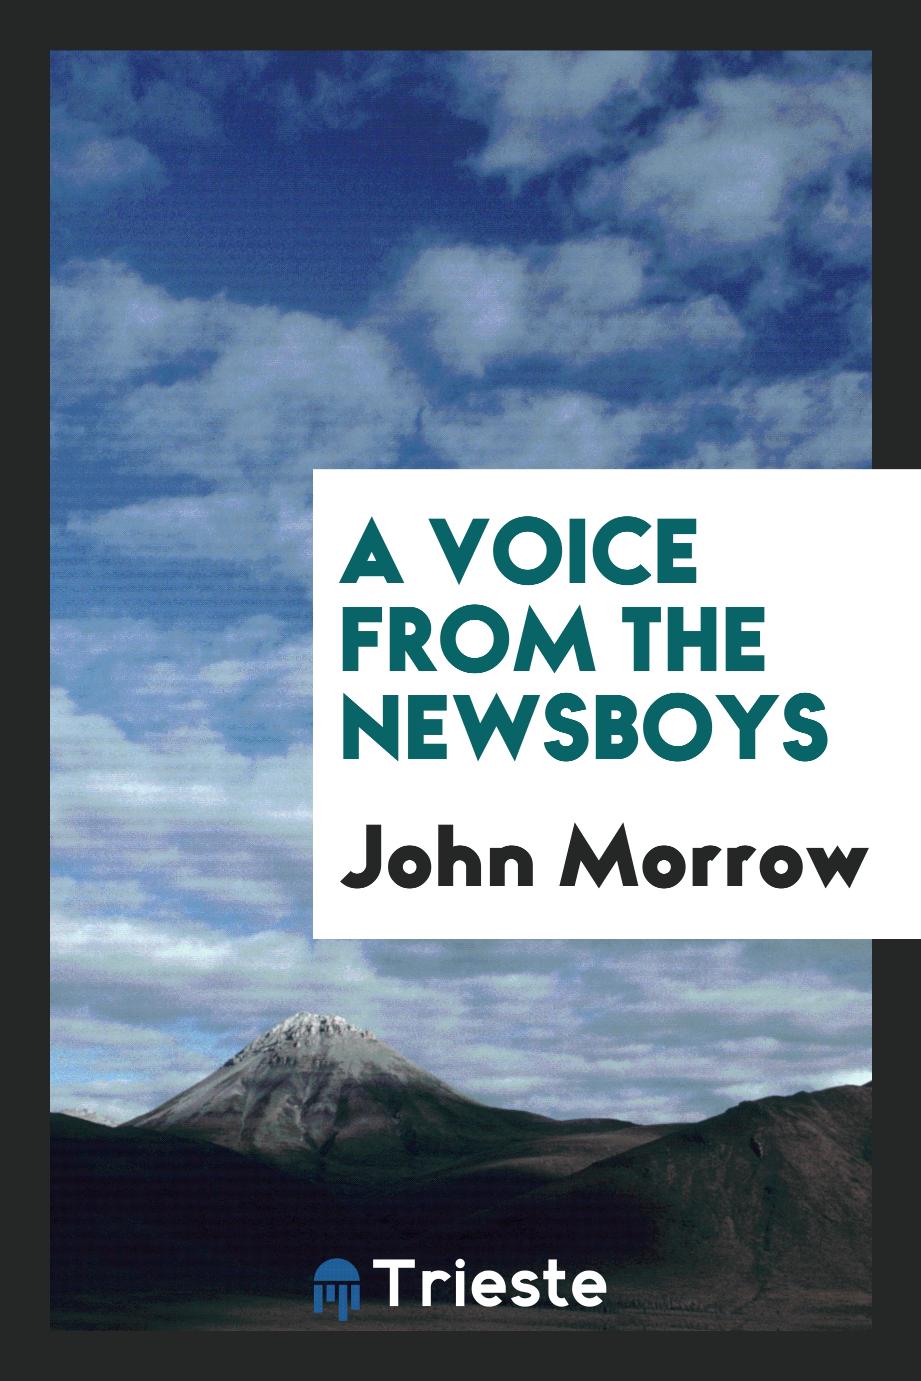 A Voice from the Newsboys